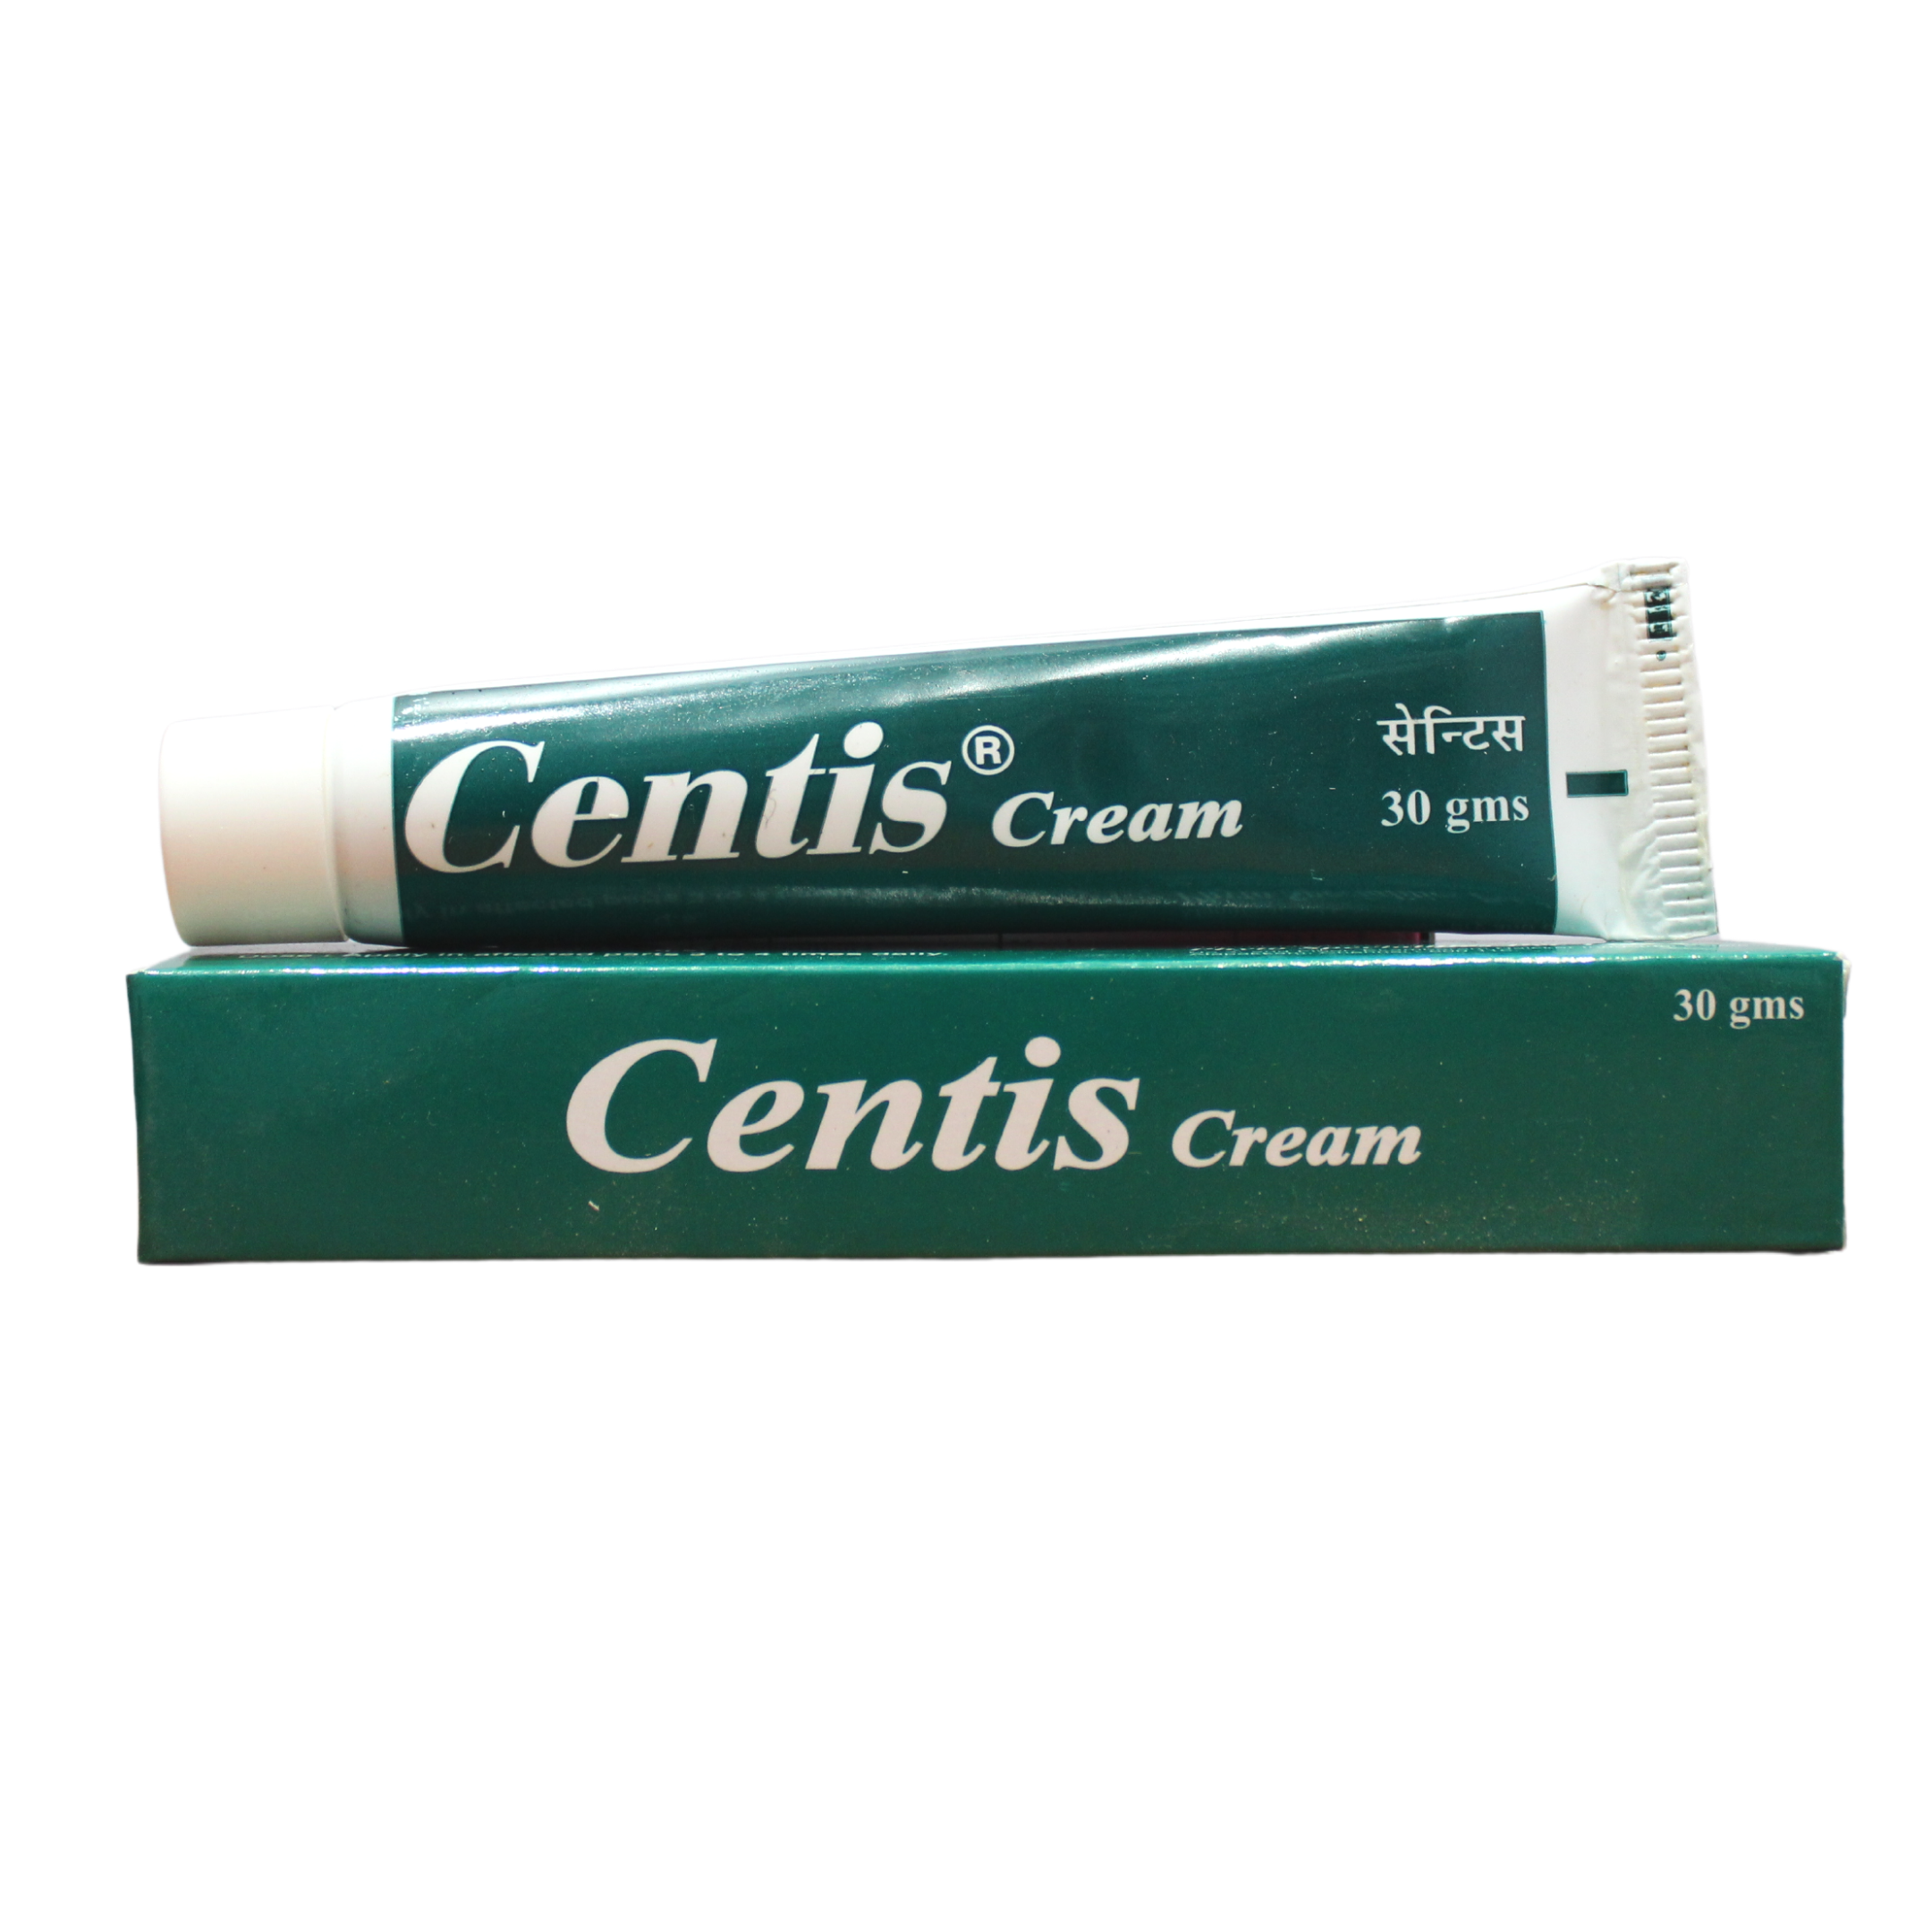 Shop Centis cream 30gm at price 165.00 from Centis Online - Ayush Care